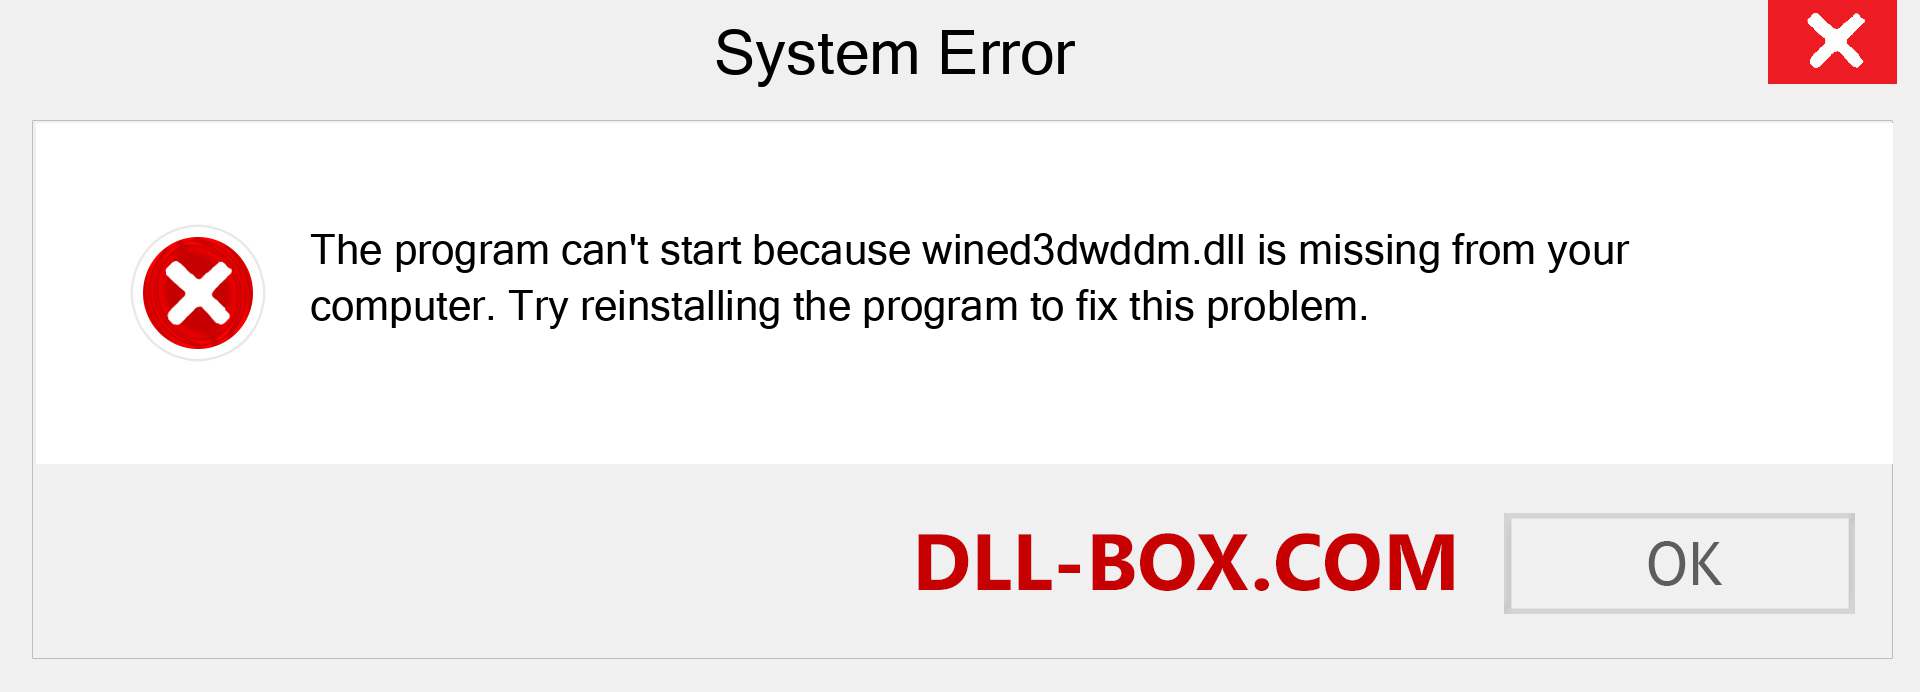  wined3dwddm.dll file is missing?. Download for Windows 7, 8, 10 - Fix  wined3dwddm dll Missing Error on Windows, photos, images